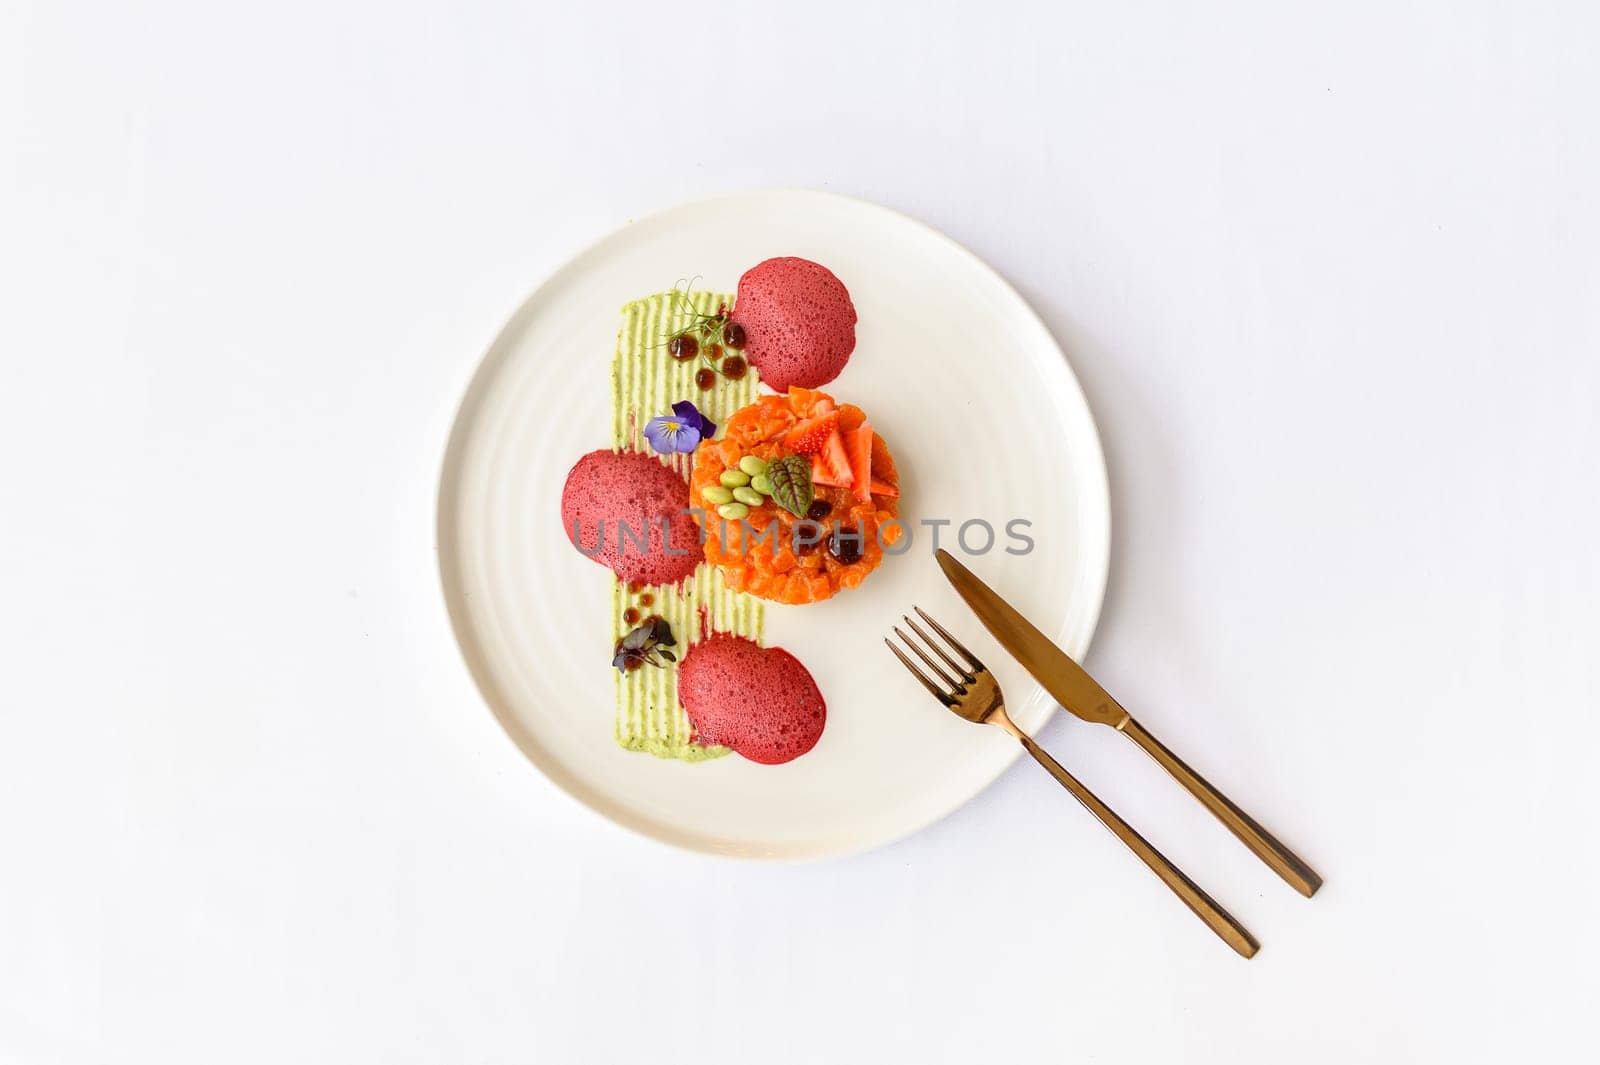 Salmon tartare with strawberries, beans and sauce on a white plate on a white background